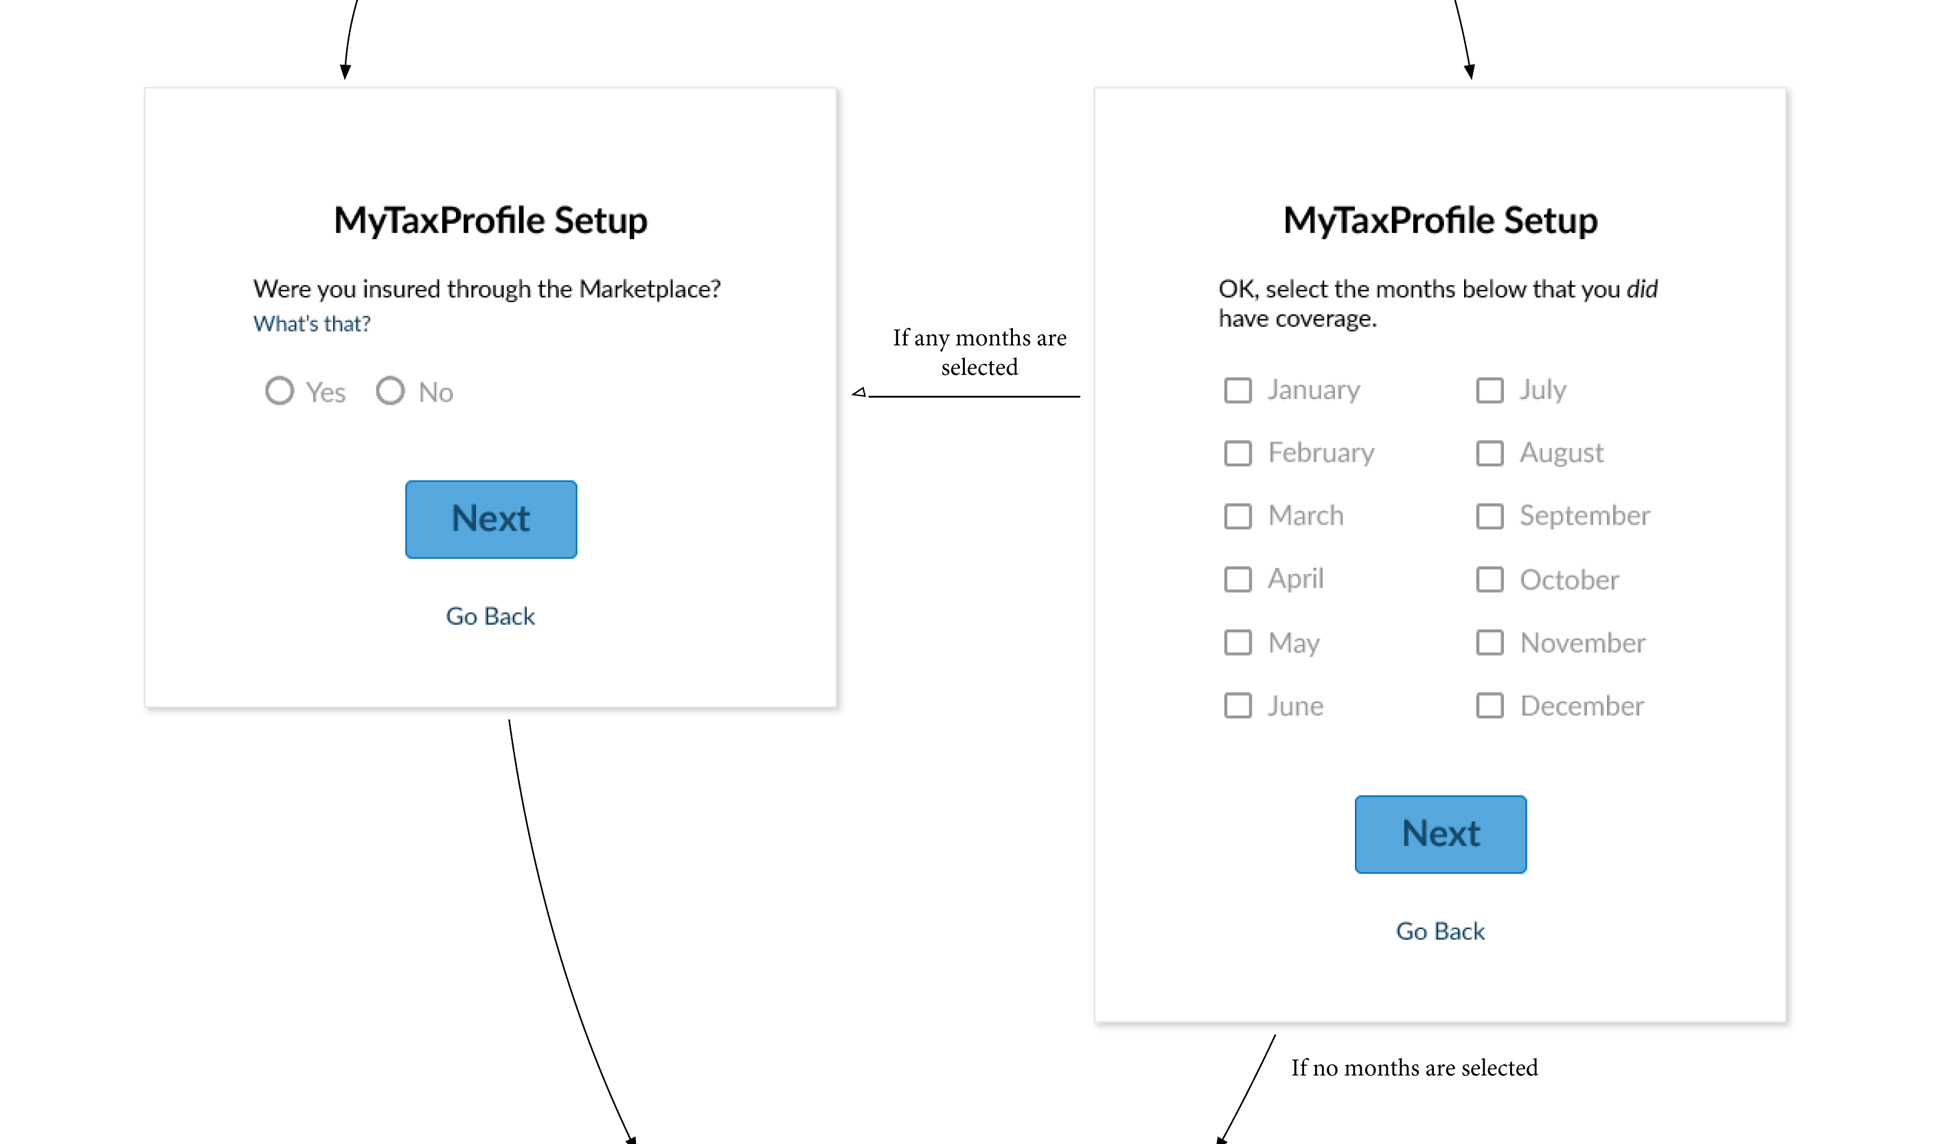 A page from a tax design challenge submission. A part of a task flow for setting up a MyTaxProfile account.